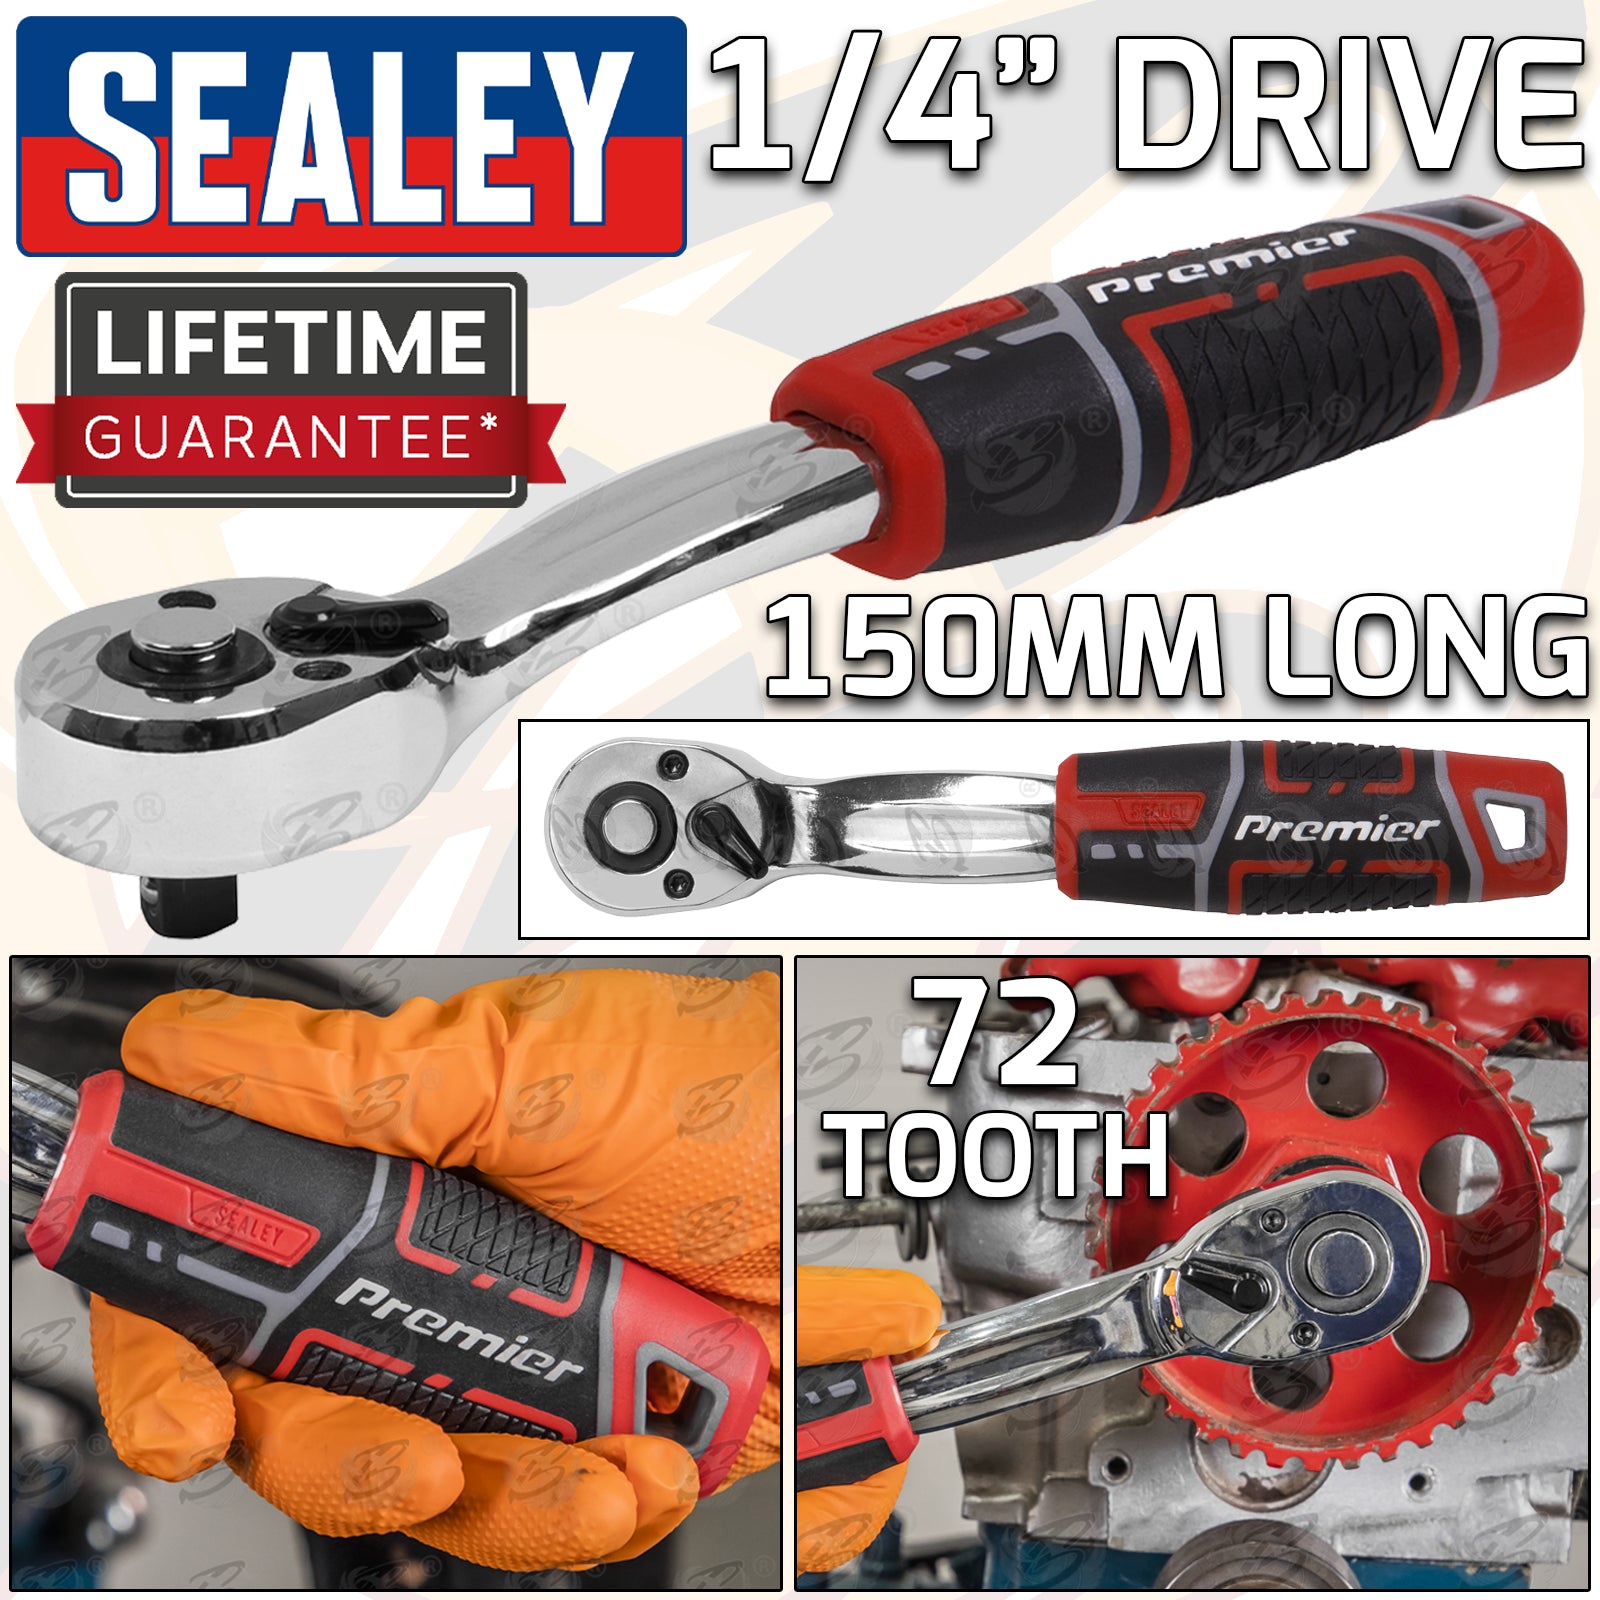 SEALEY 1/4" DRIVE 72 TOOTH CURVED RATCHET HANDLE